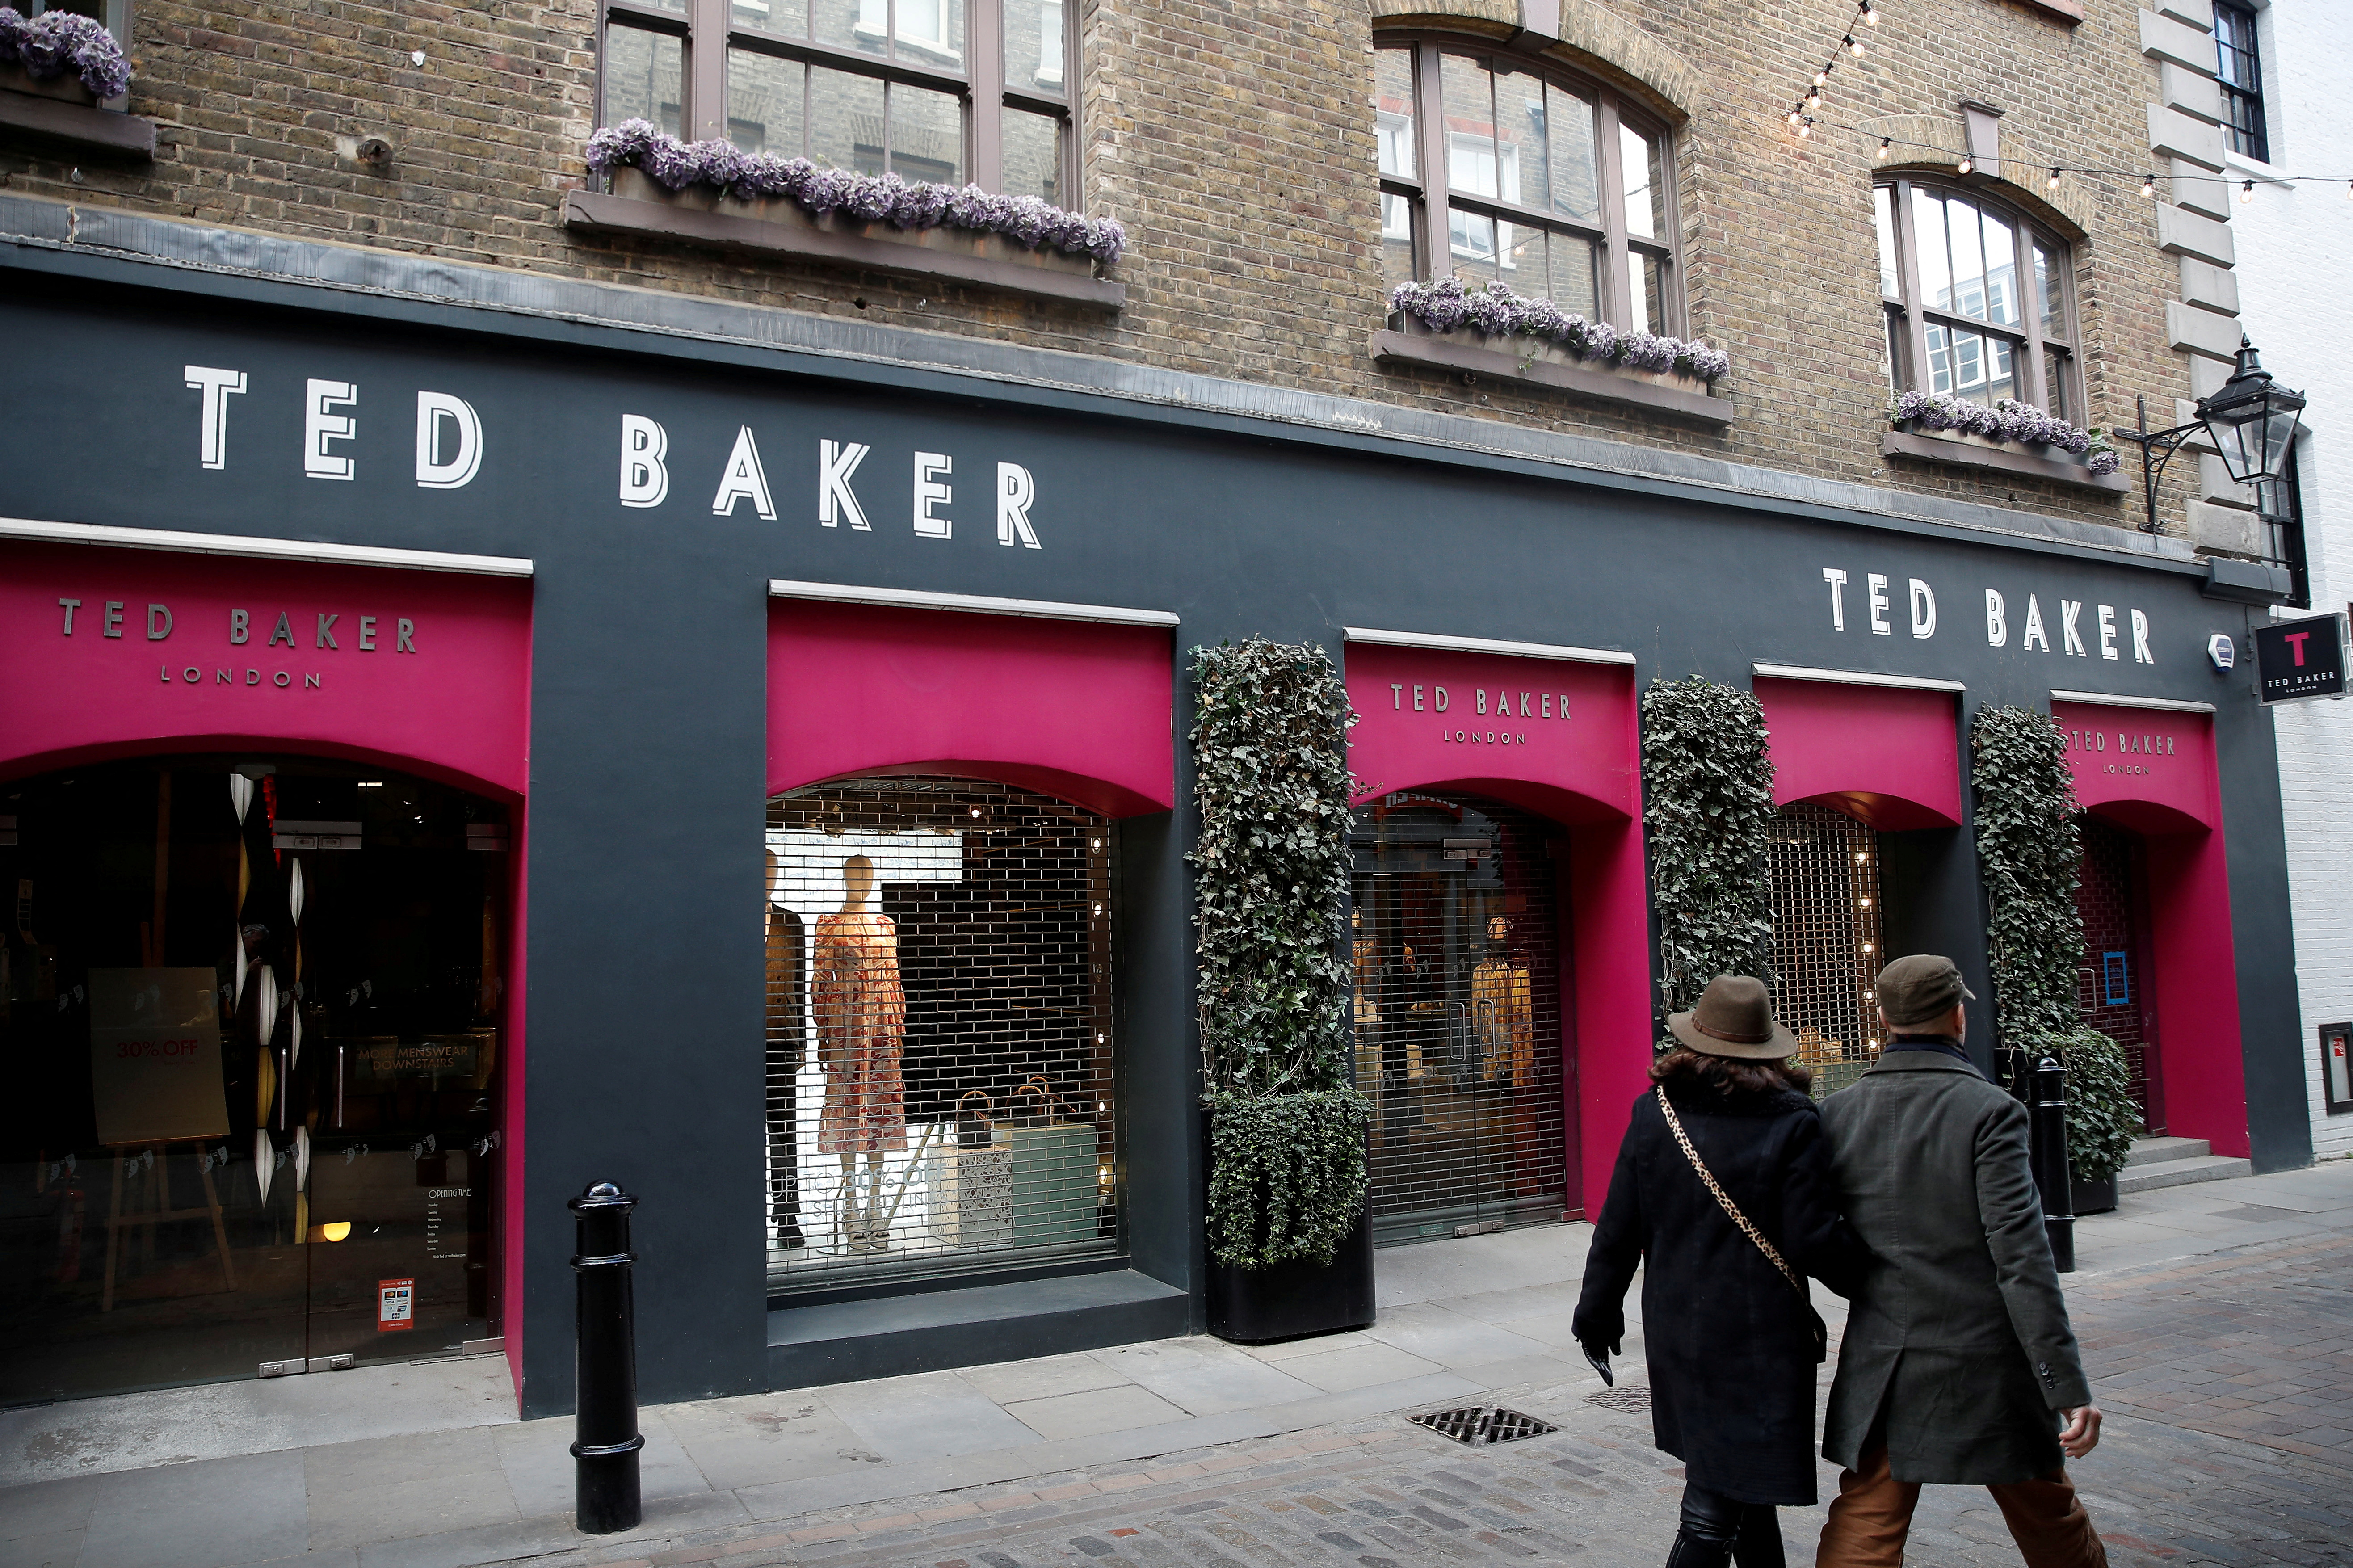 Ted Baker founder on new venture: 'Fashion with performance